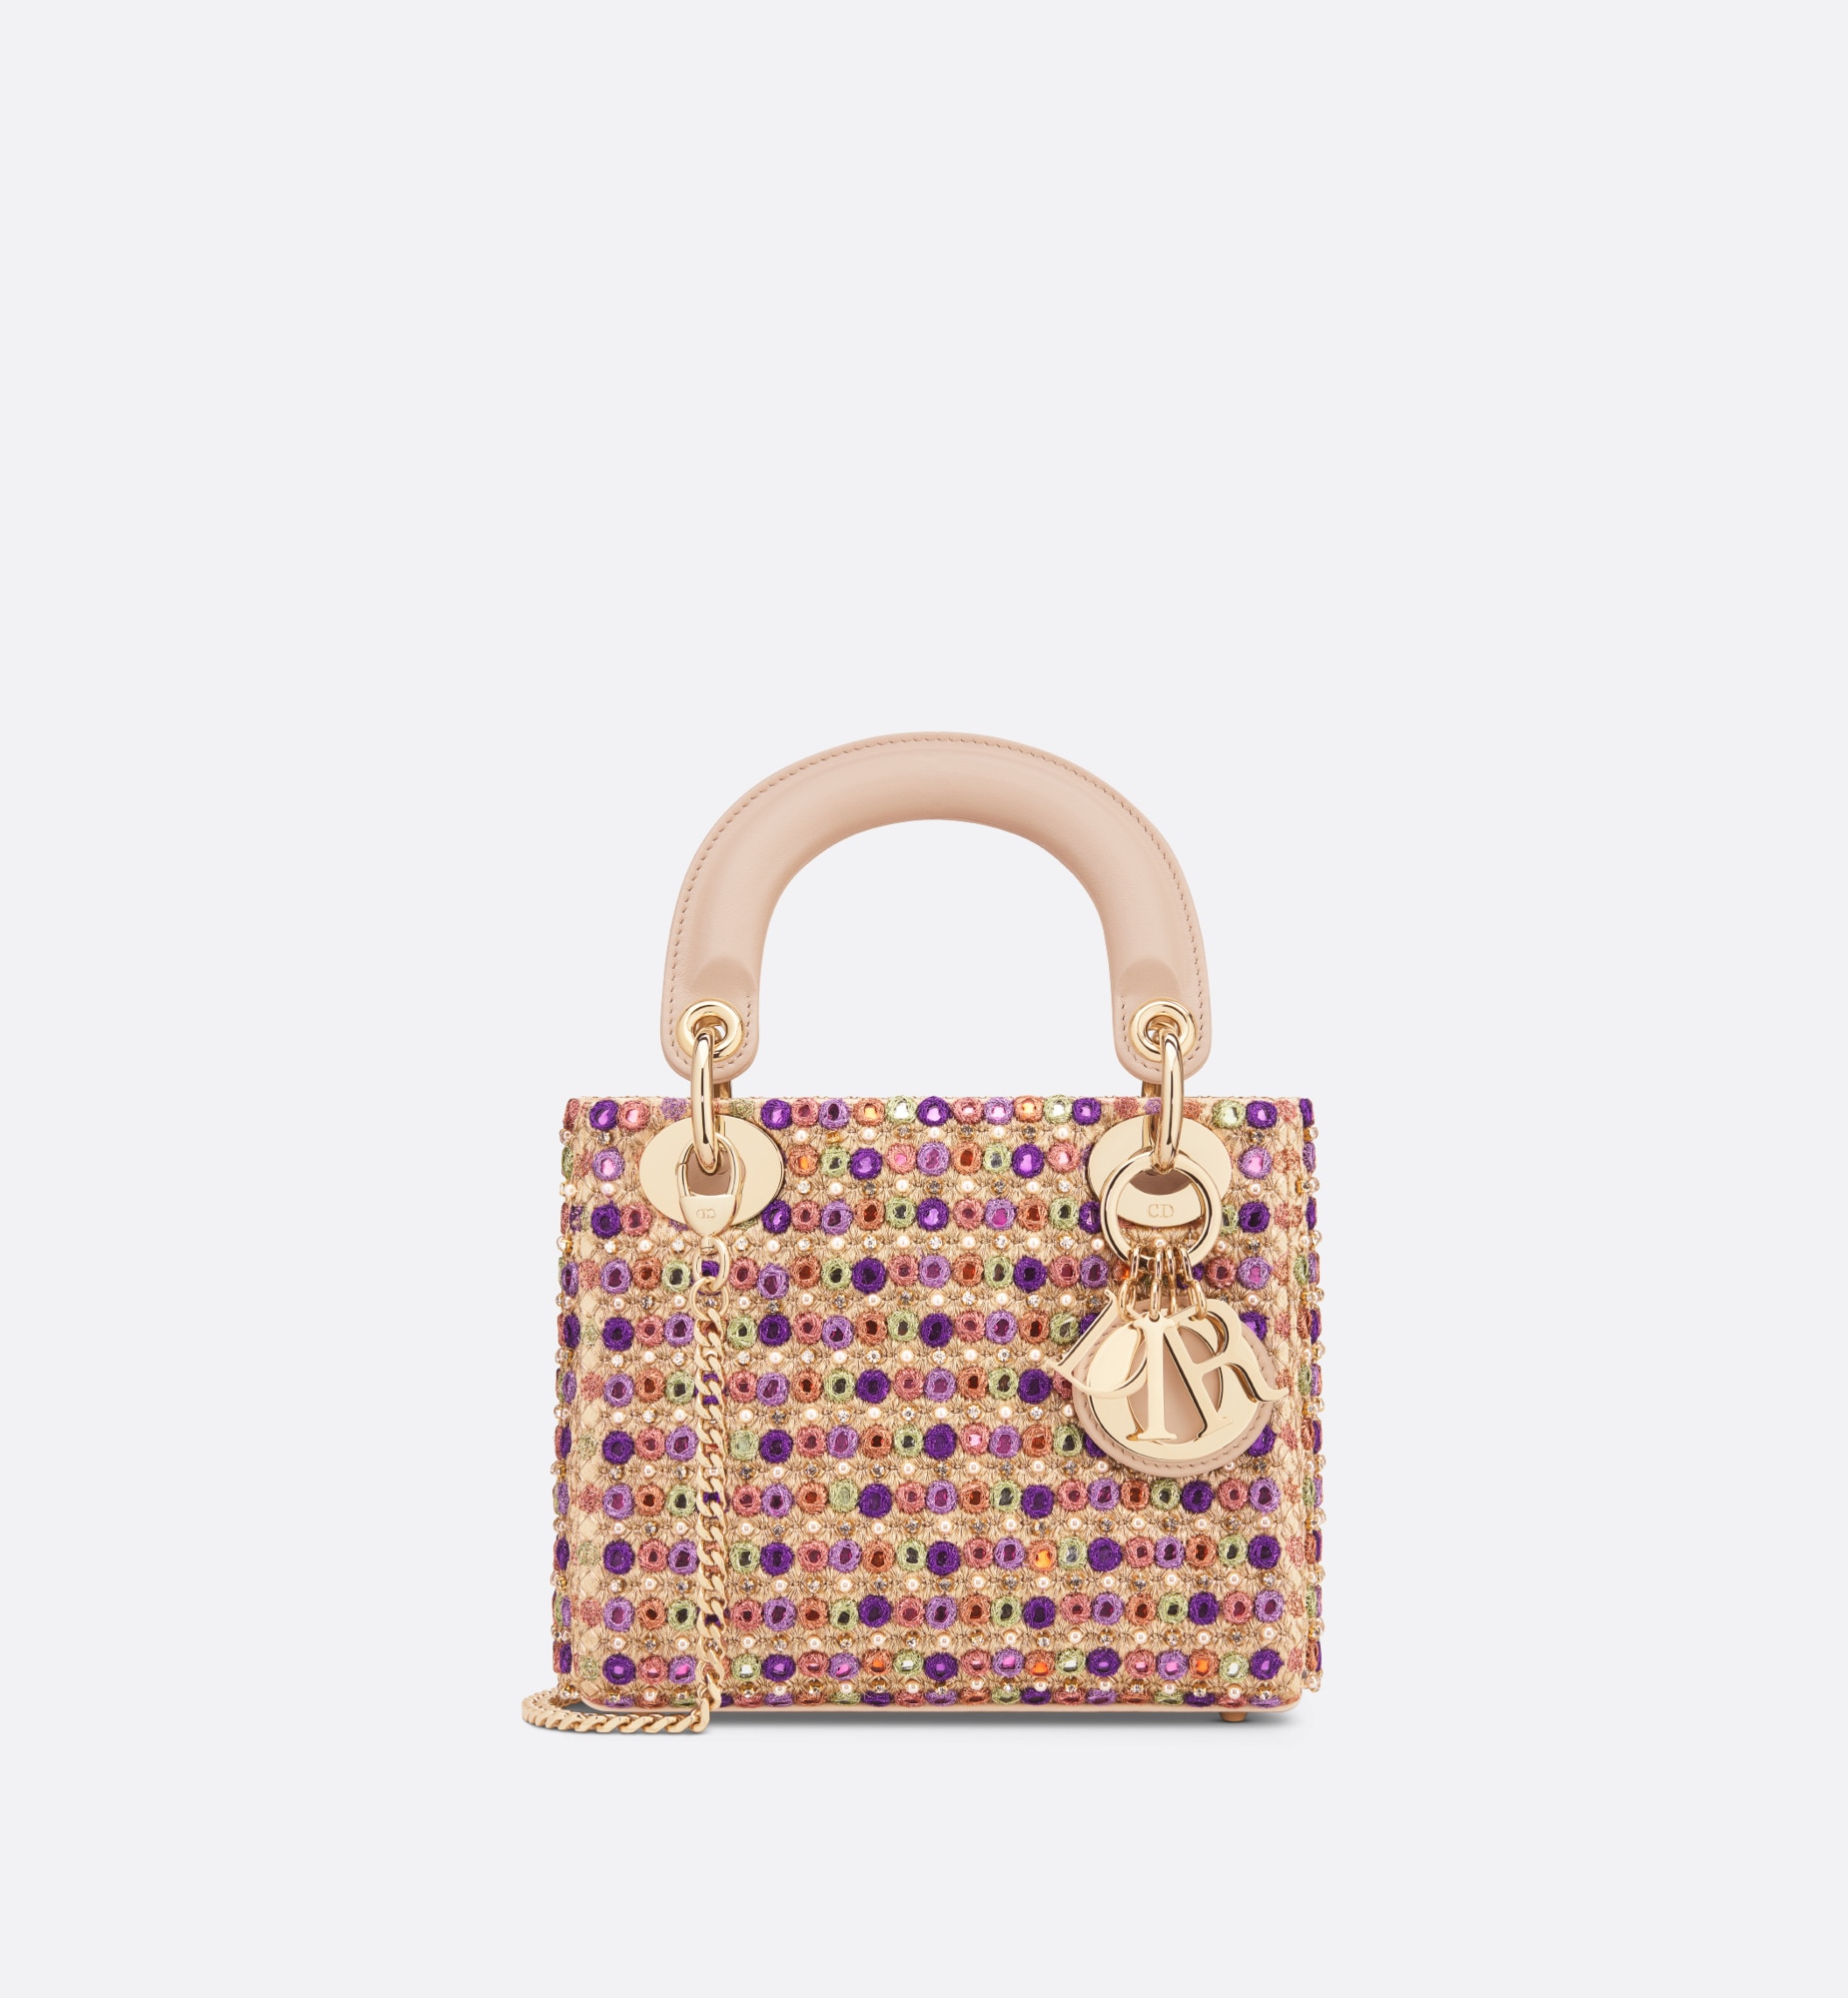 Mini lady dior bag multicolor satin embroidered with mirrors, beads and strass